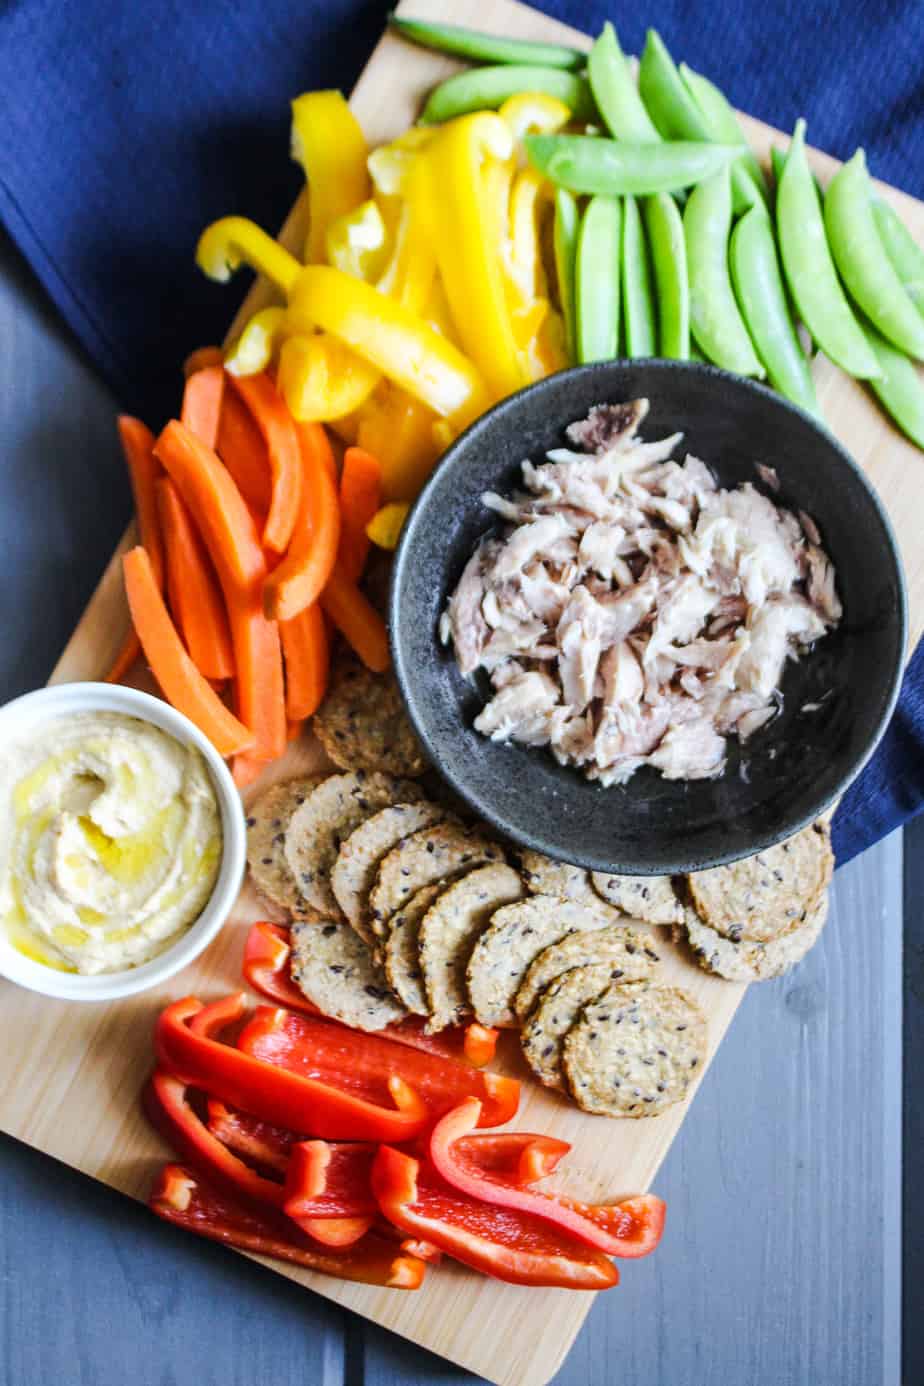 blue background with cutting board with hummus, crackers, canned mackerel, and colorful vegetables